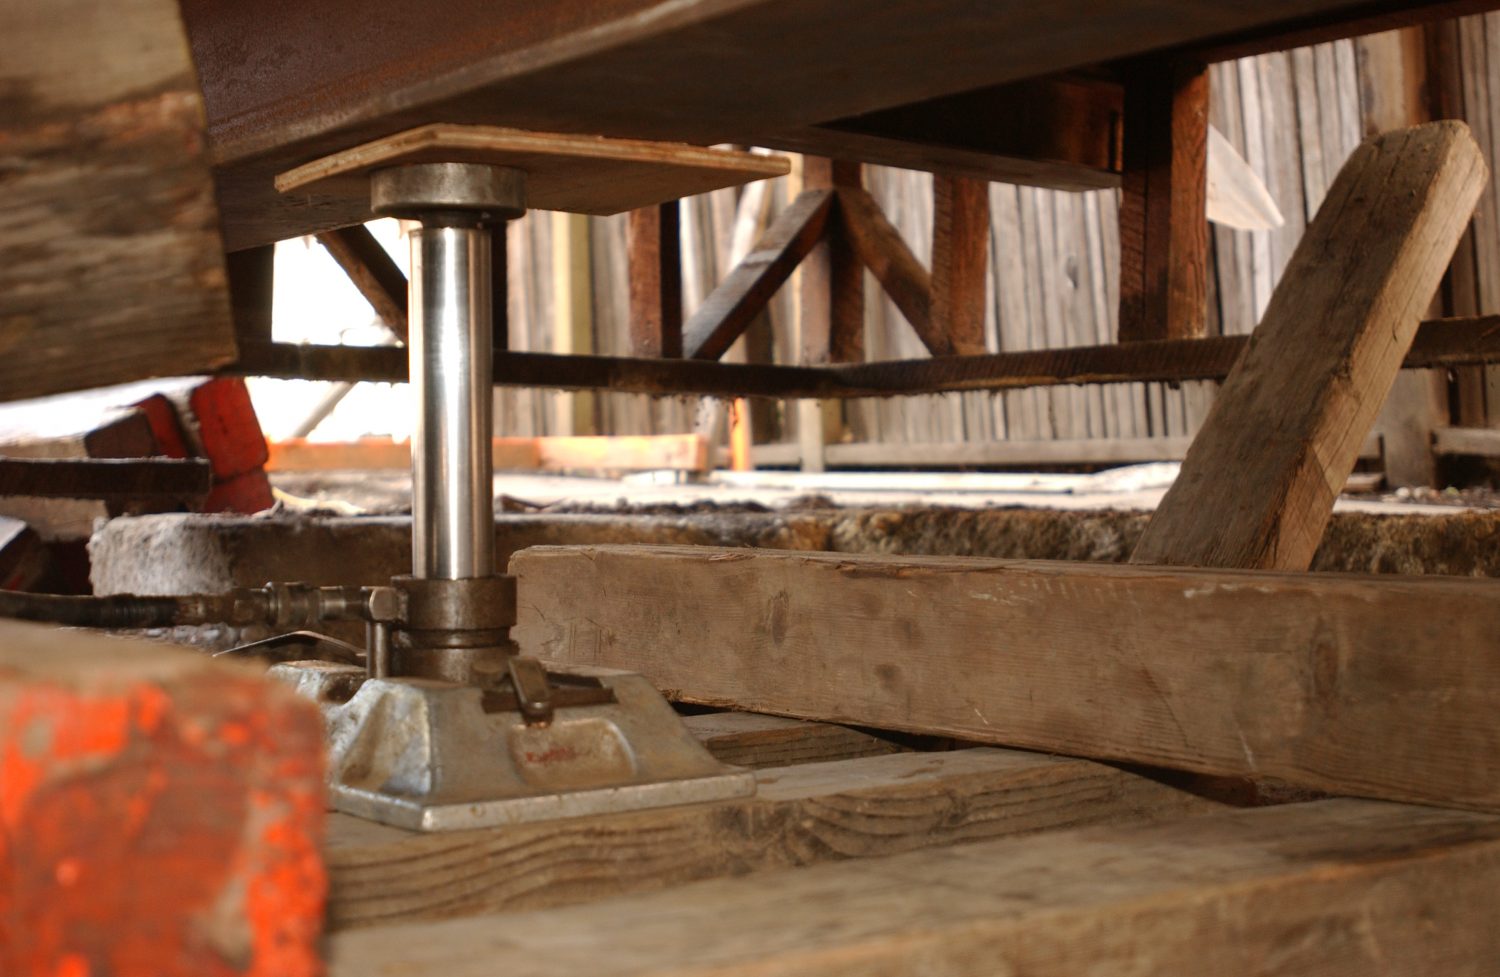 A heavy-duty hydraulic jack lifts a section of the Addison Avenue house during the restoration project.